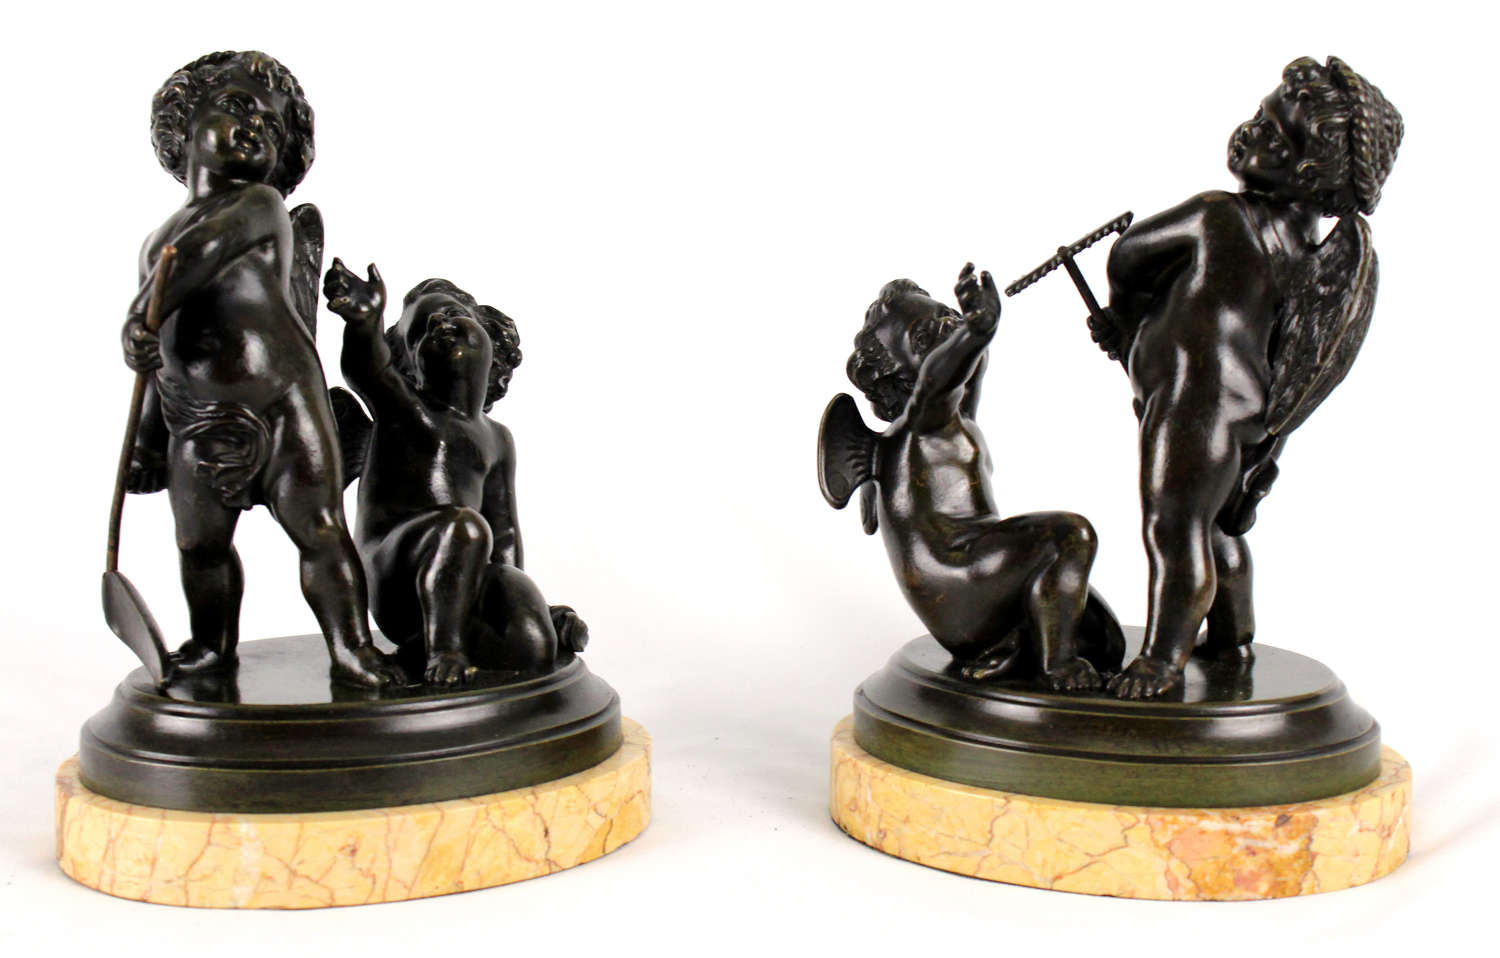 A Pair Of 19th Century French Bronze Figures Of Cherub Farmers